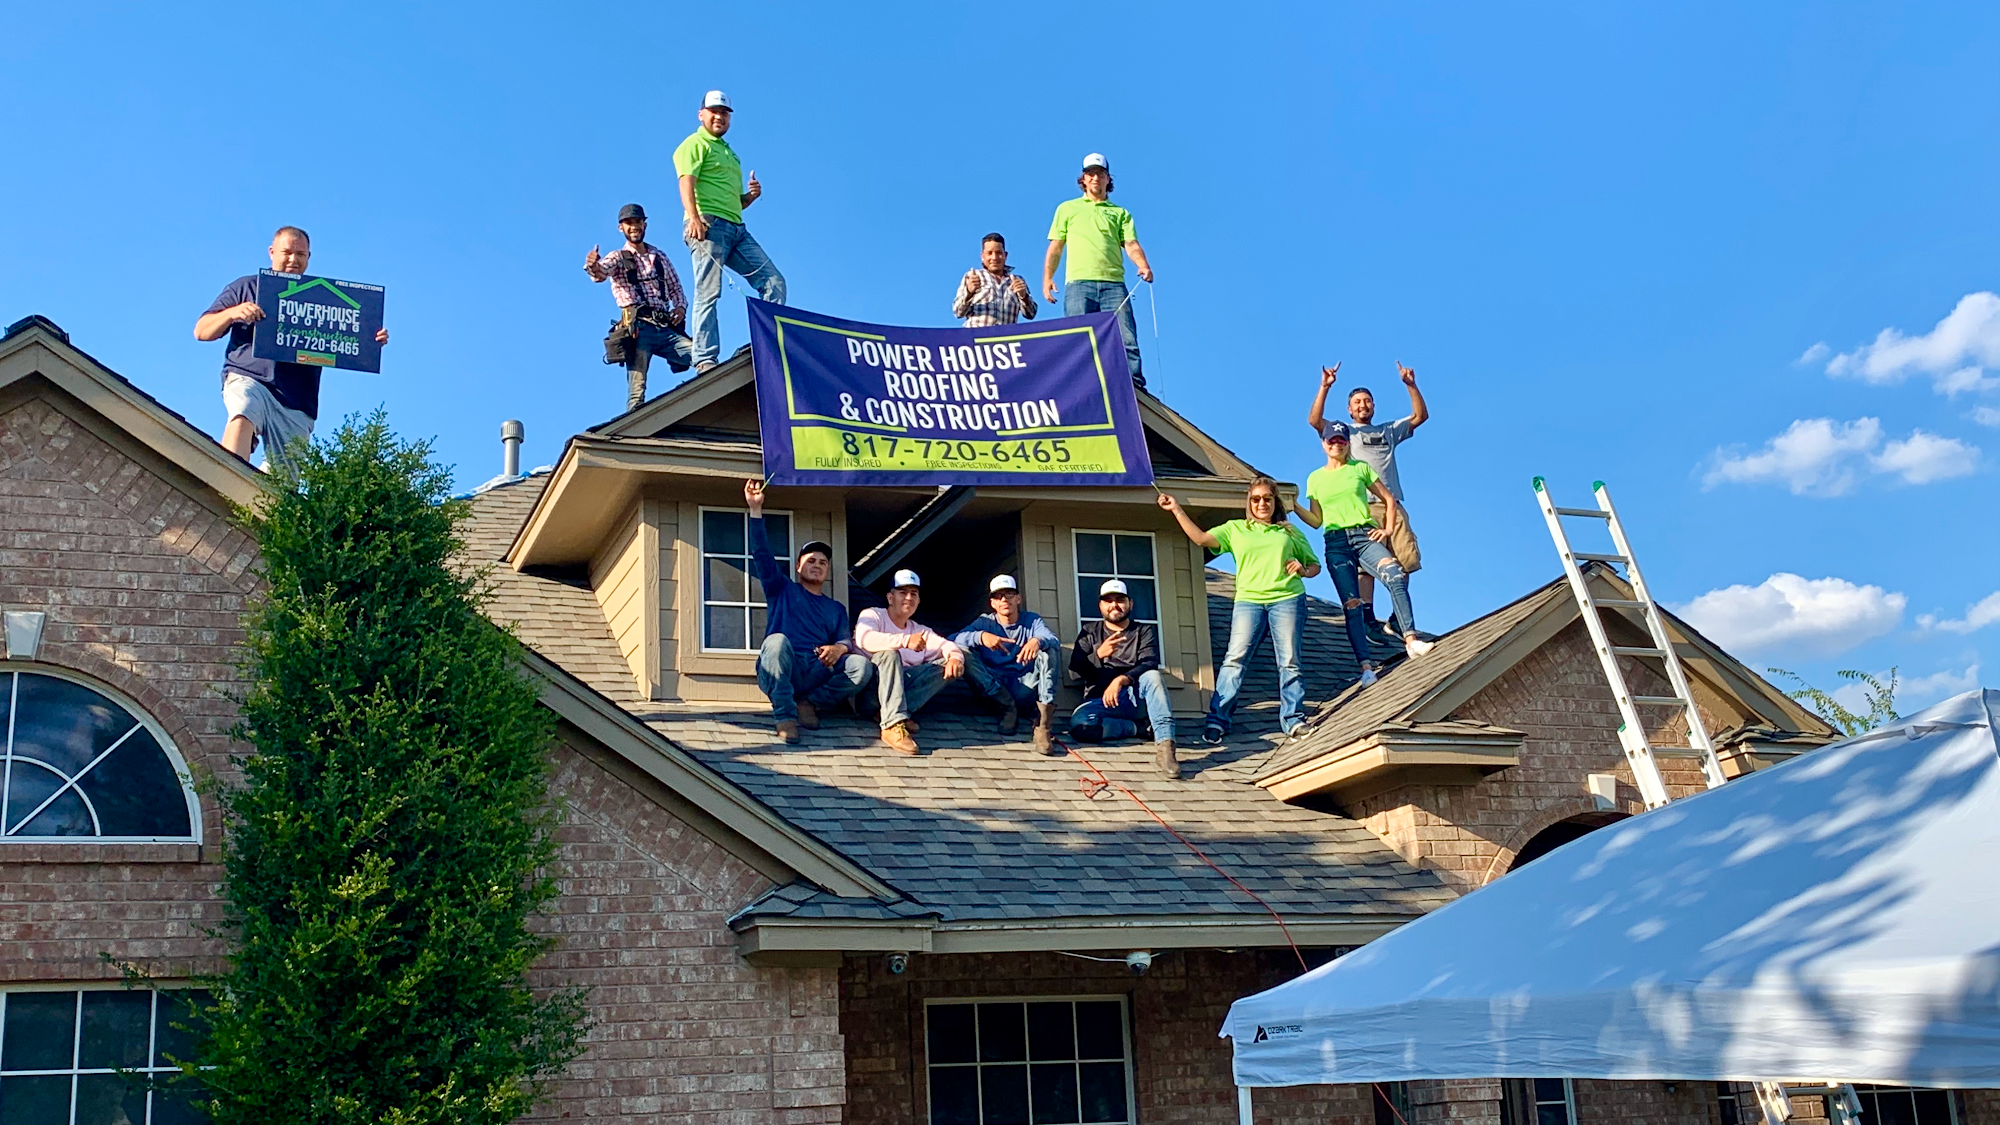 Power House Roofing & Construction, LLC 12512 Willow Springs Rd Suite 100, Haslet Texas 76052